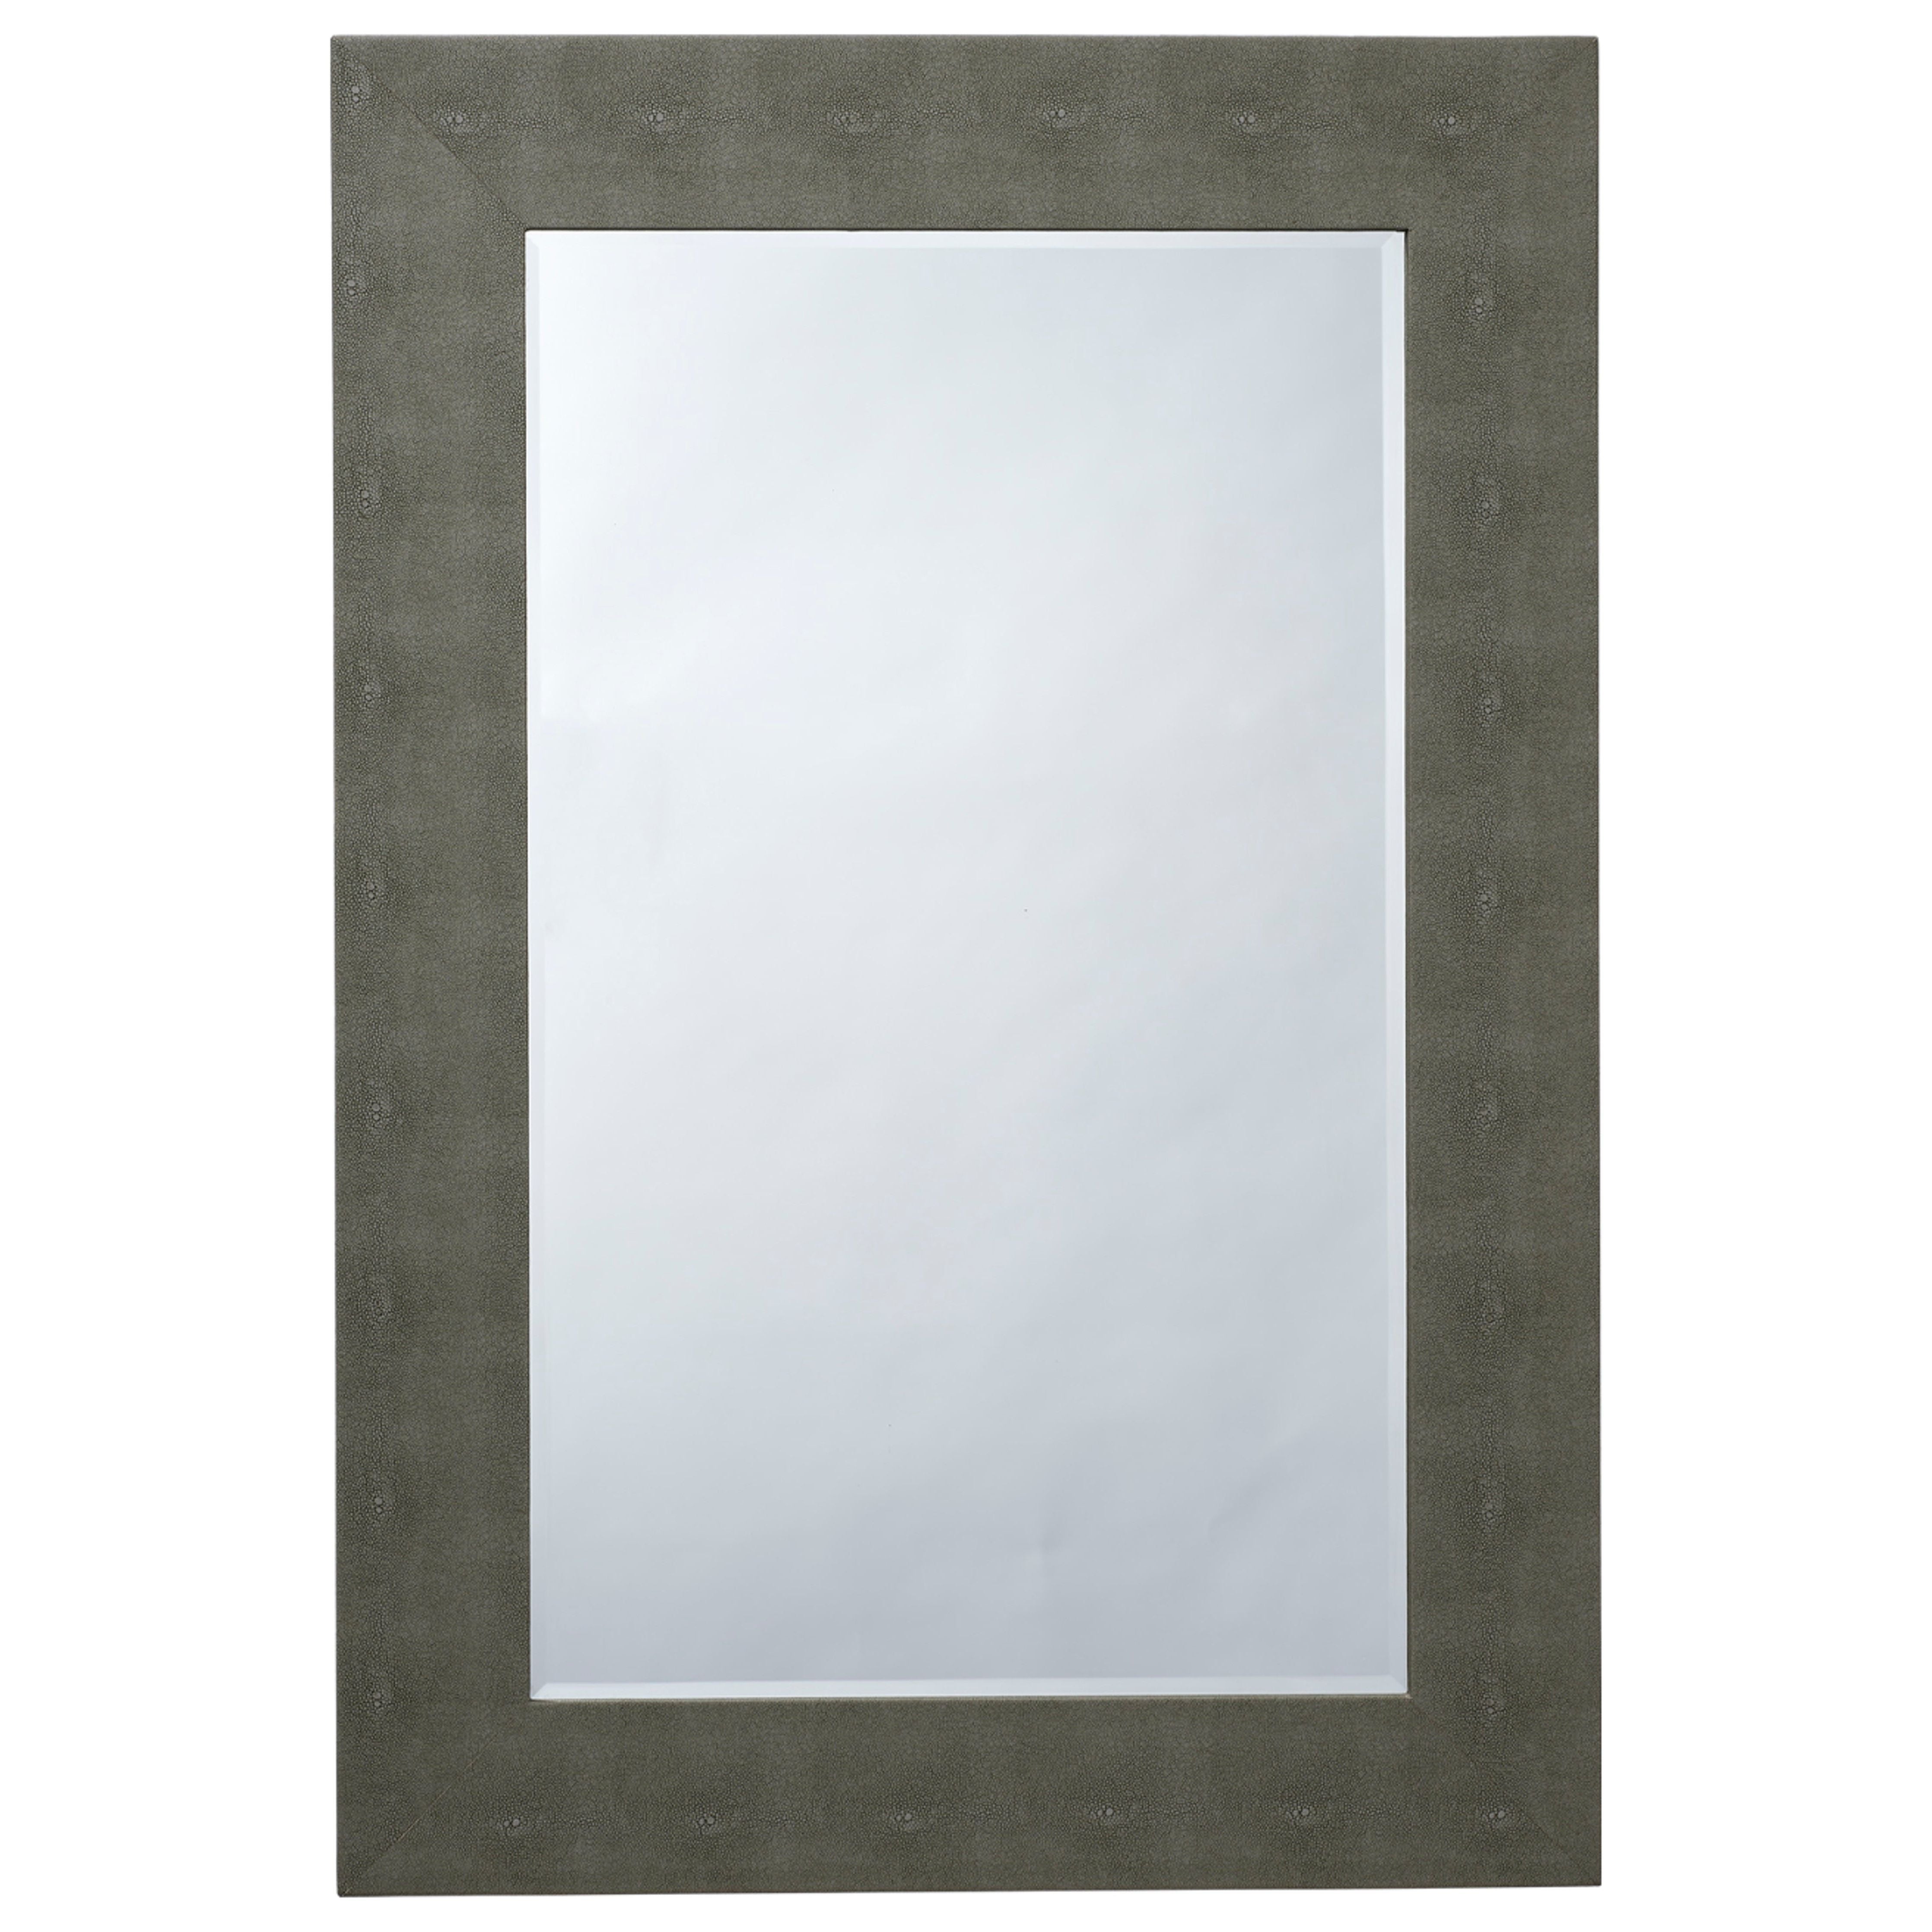 Jamie Young Company - LS6STRURECGR - Structure Rectangle Mirror - Structure - Grey